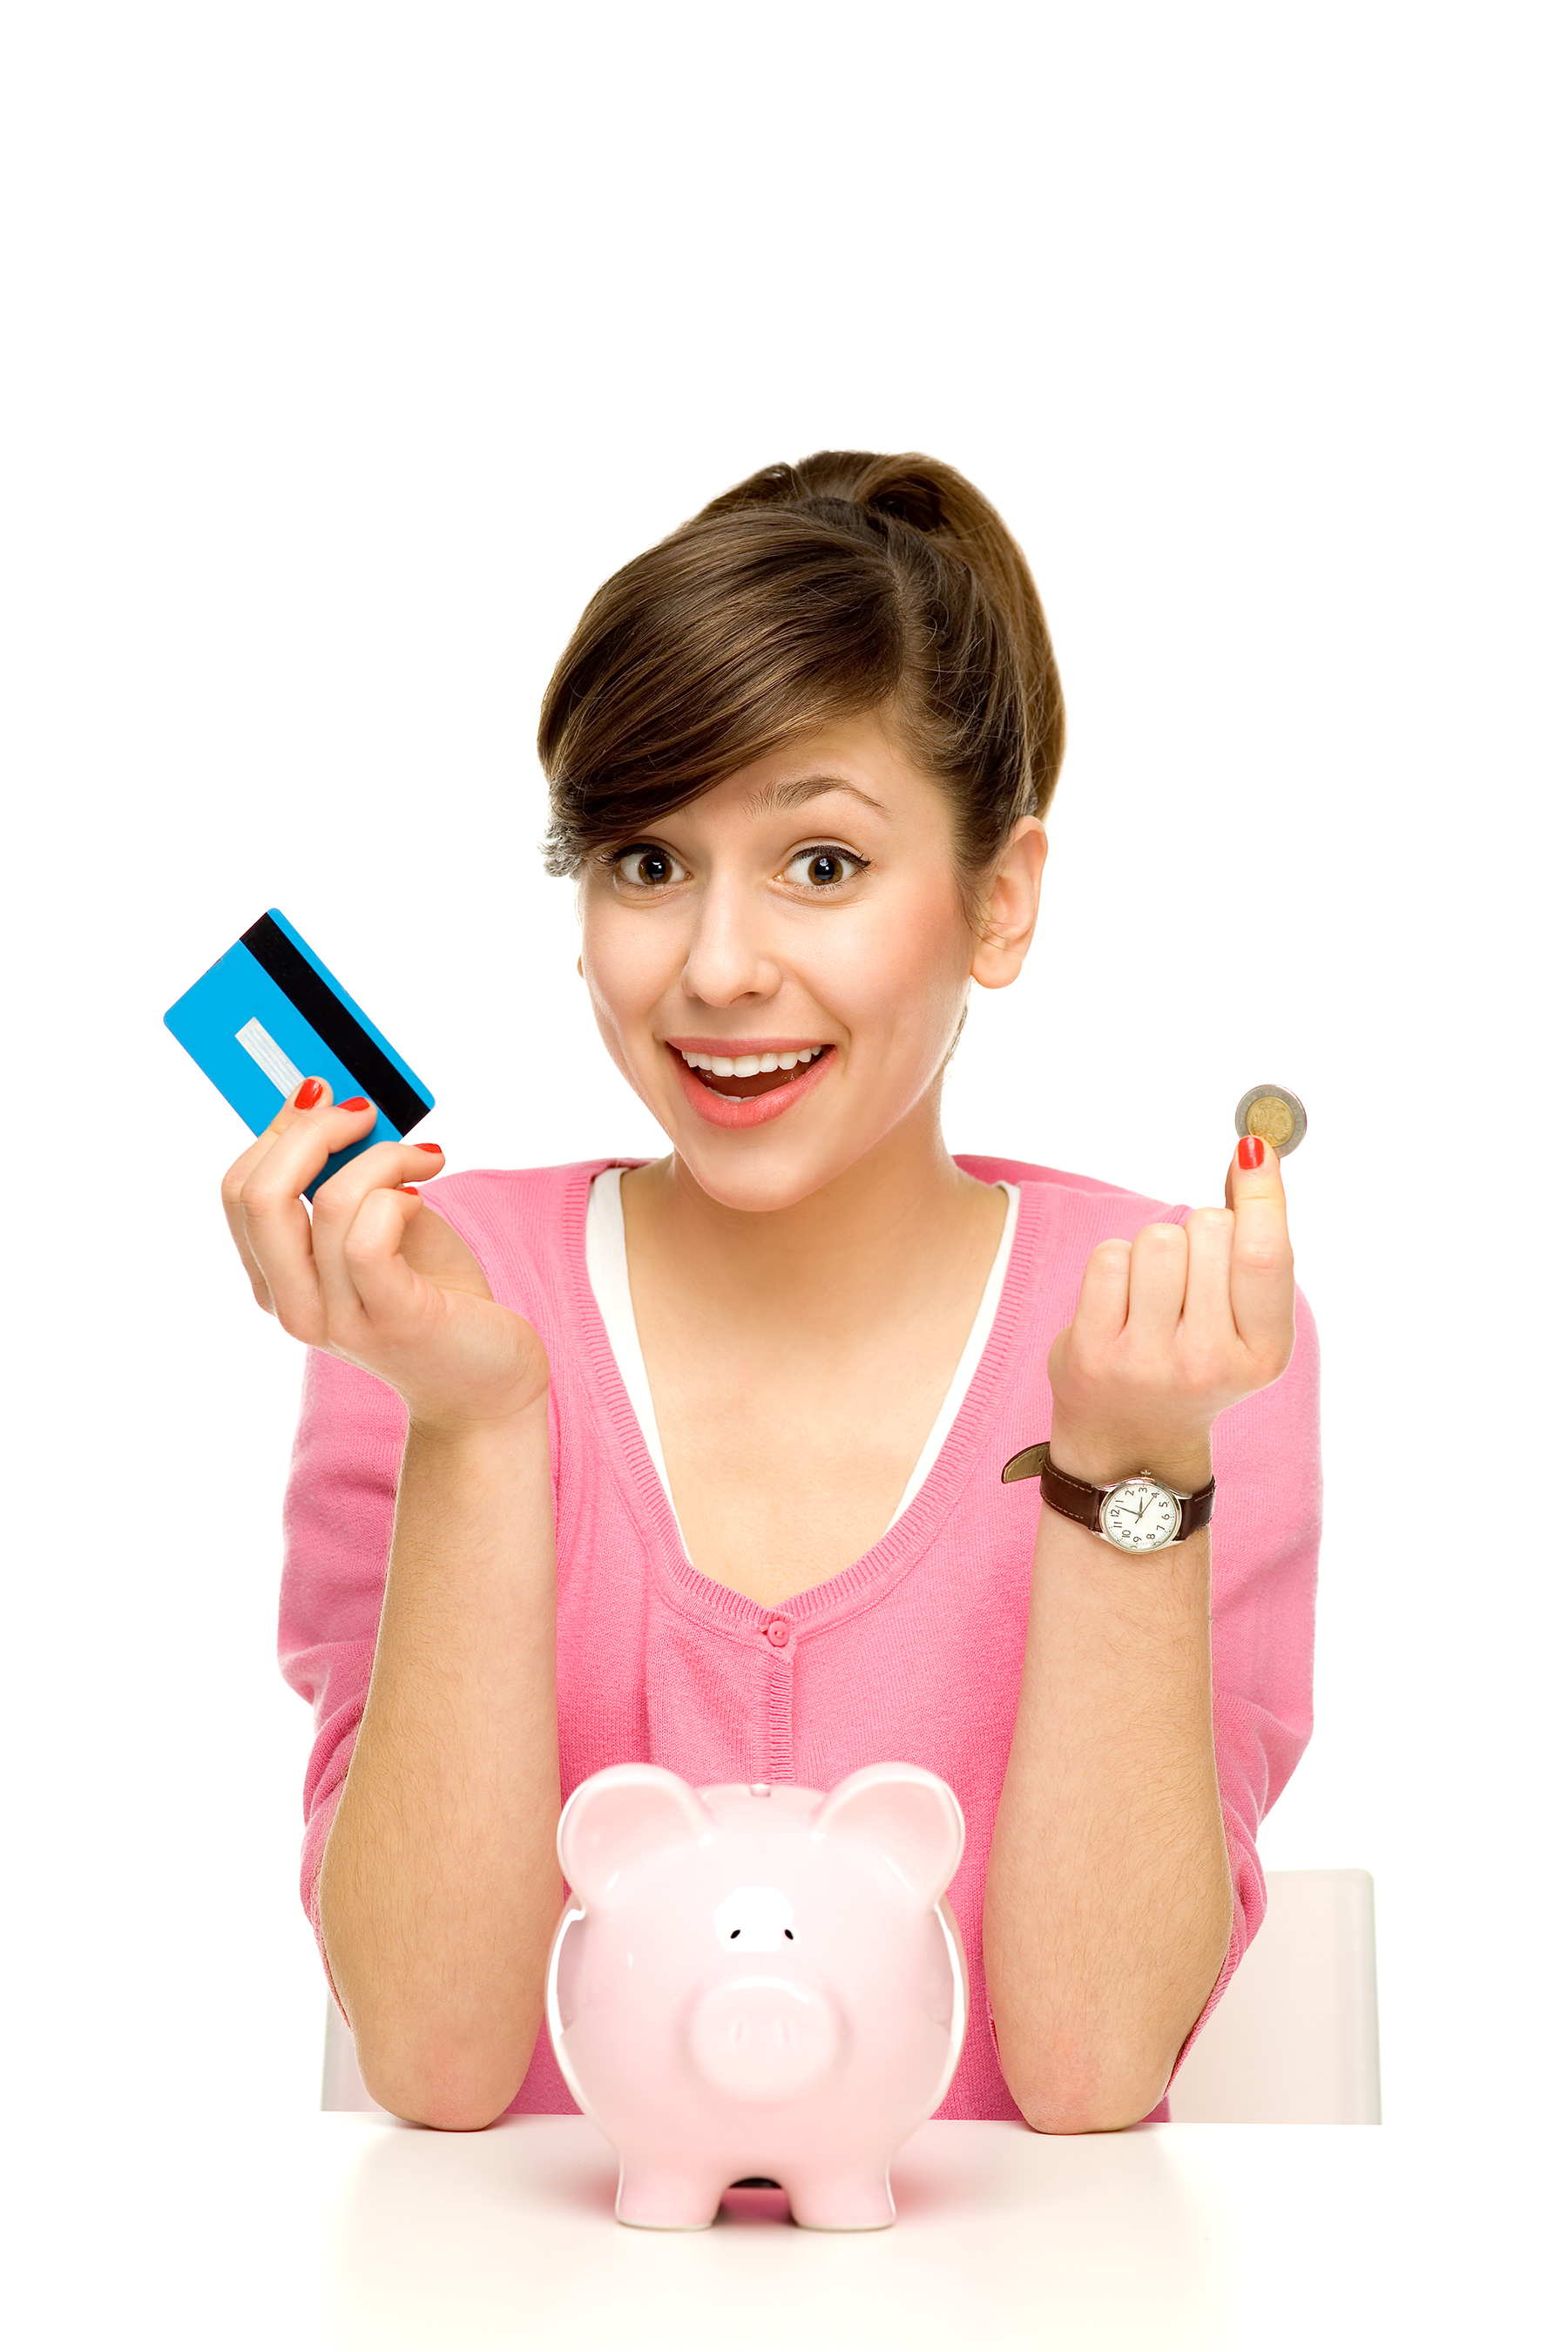 Is Your Teen Ready For A Debit Card